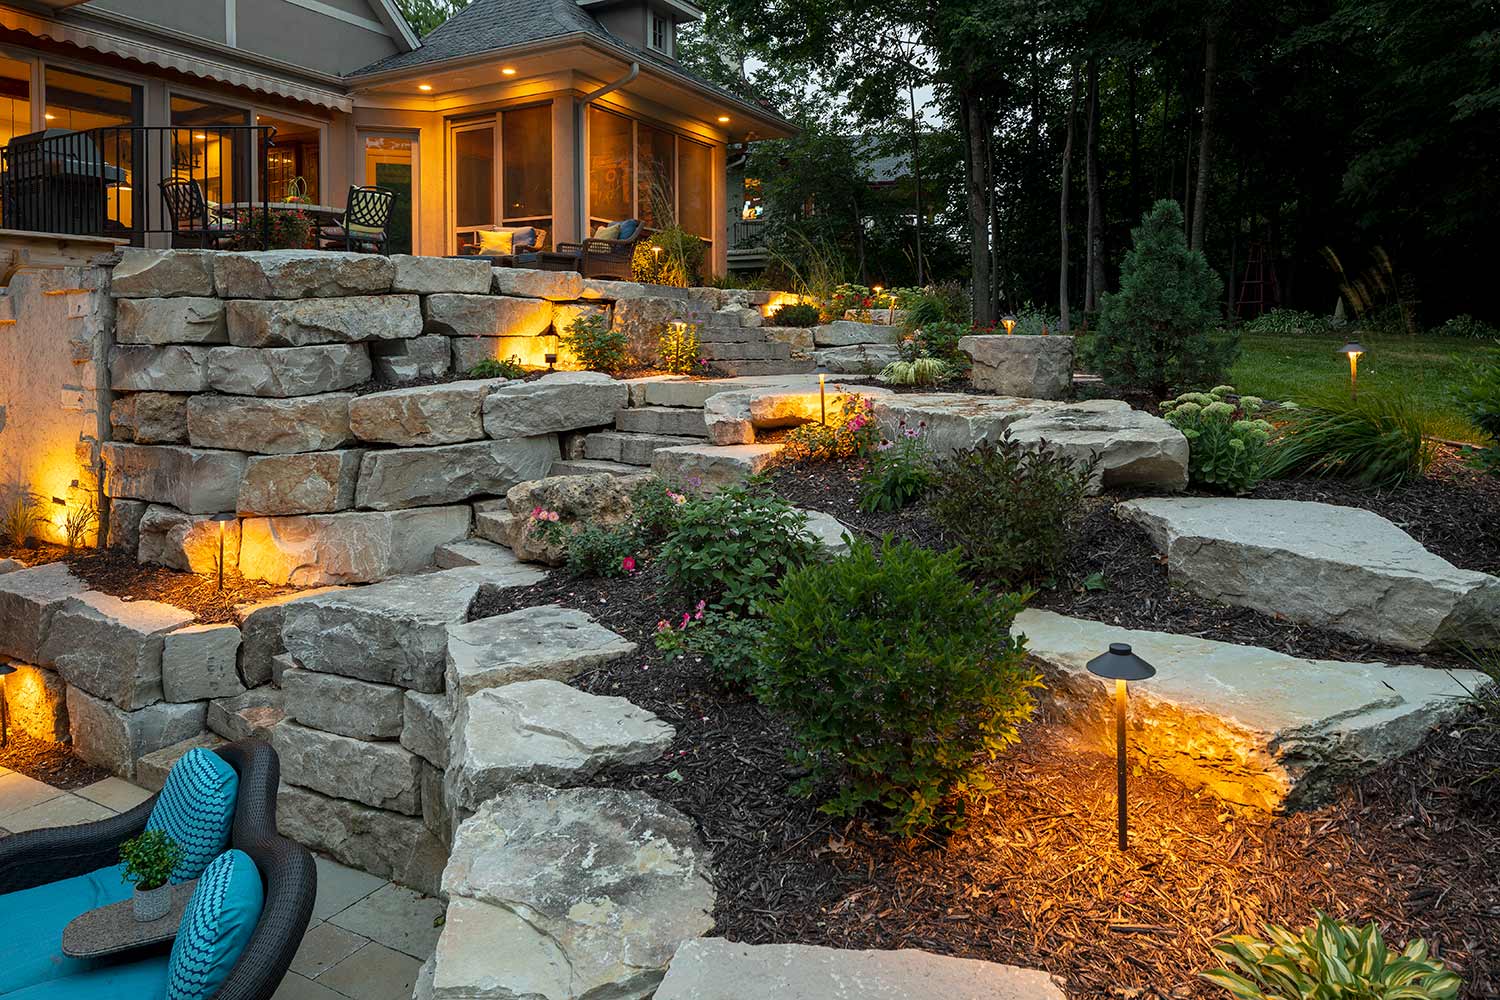 Landscape Lighting-Houston TX Landscape Designs & Outdoor Living Areas-We offer Landscape Design, Outdoor Patios & Pergolas, Outdoor Living Spaces, Stonescapes, Residential & Commercial Landscaping, Irrigation Installation & Repairs, Drainage Systems, Landscape Lighting, Outdoor Living Spaces, Tree Service, Lawn Service, and more.